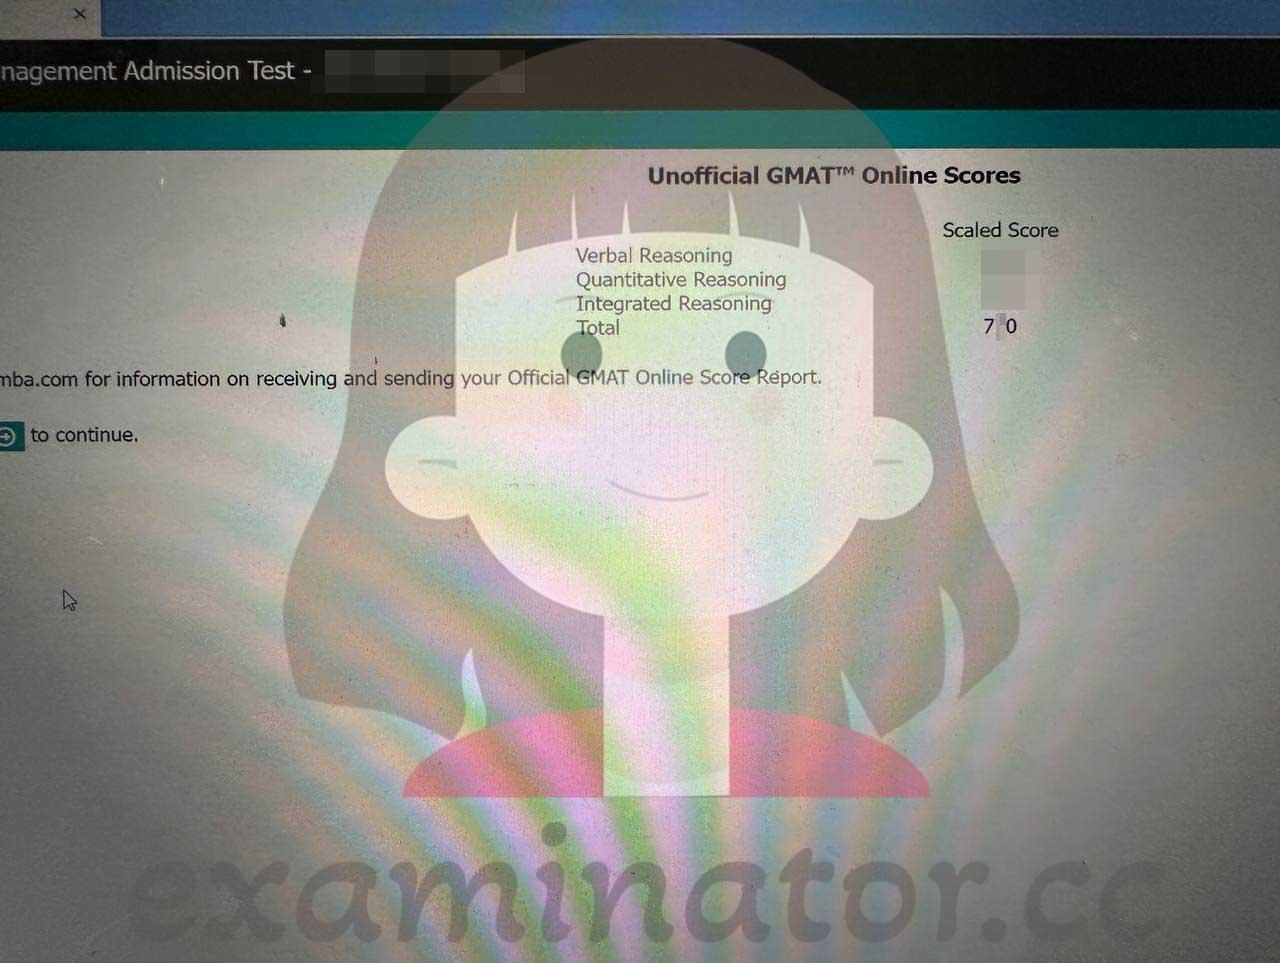 score image for GMAT Cheating success story #603